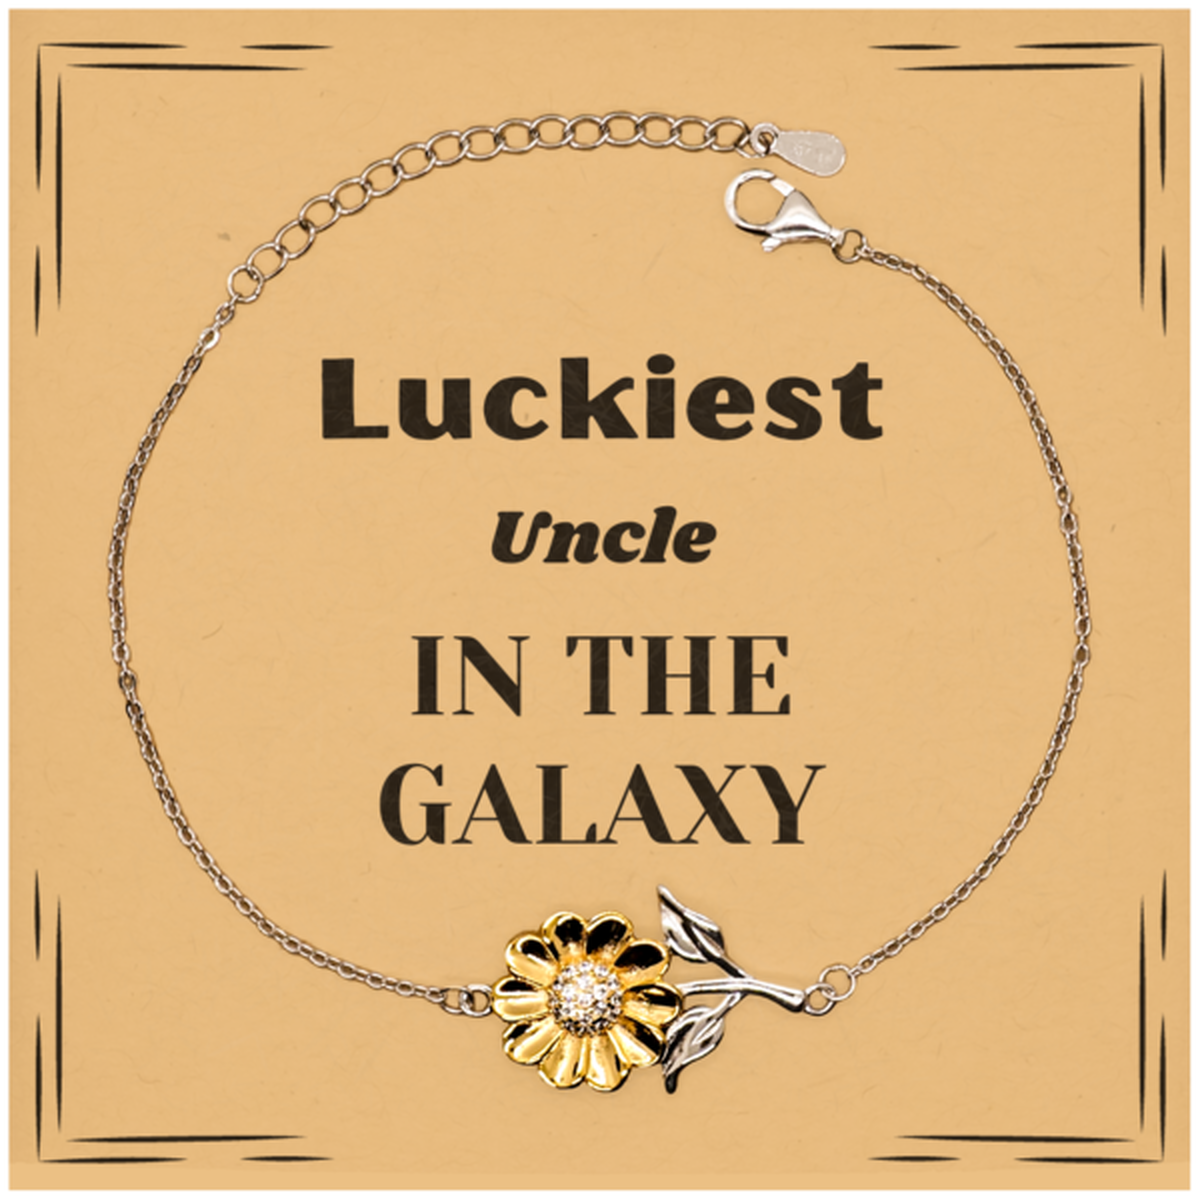 Luckiest Uncle in the Galaxy, To My Uncle Message Card Gifts, Christmas Uncle Sunflower Bracelet Gifts, X-mas Birthday Unique Gifts For Uncle Men Women